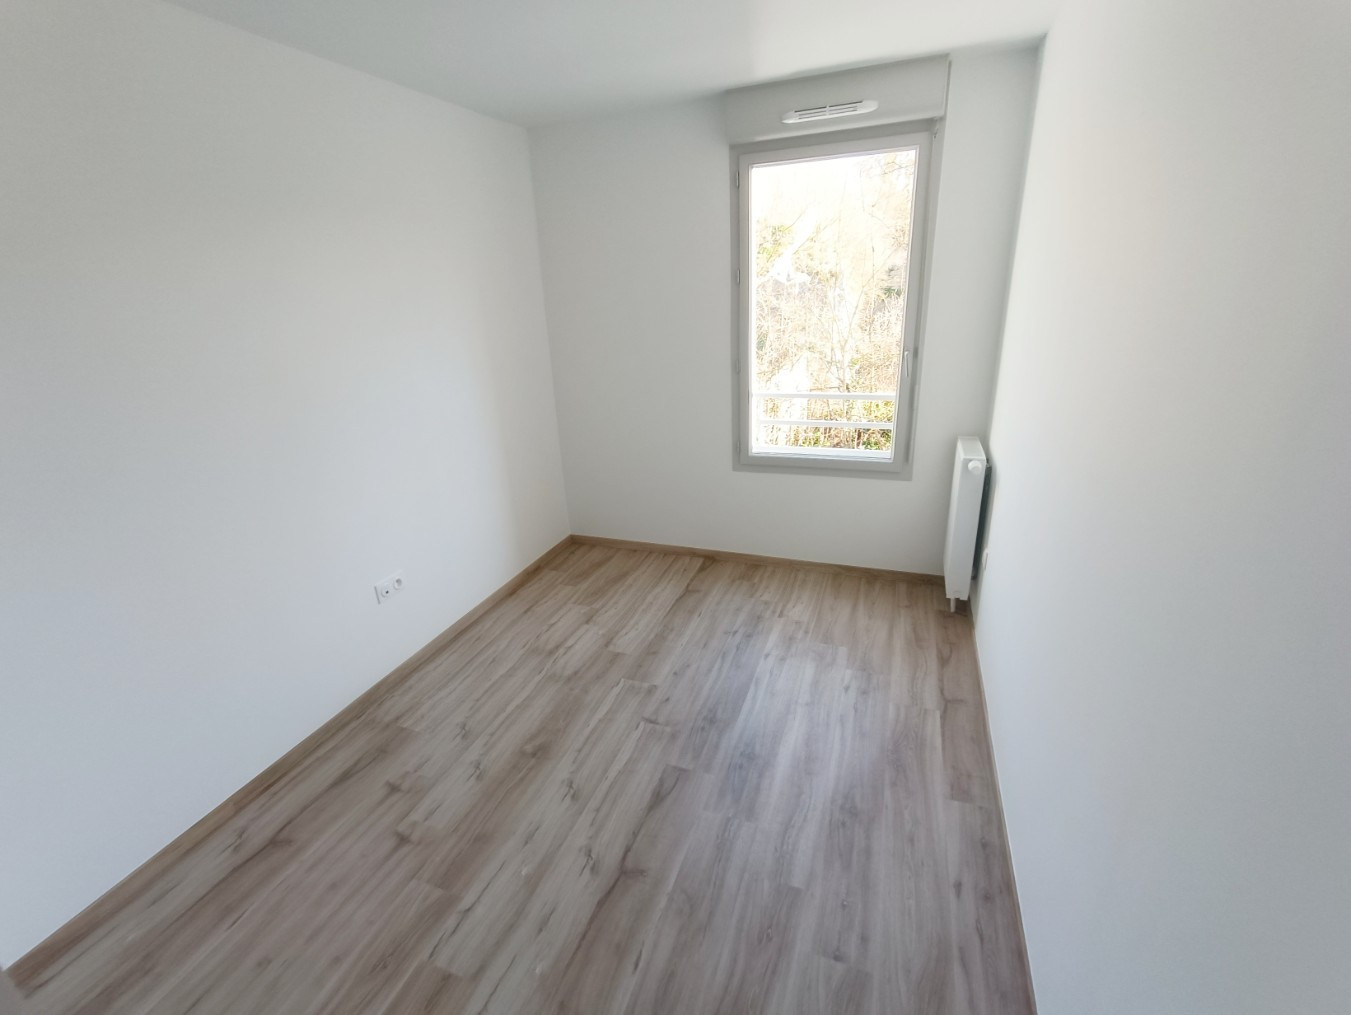 
                                                Location
                                                 Appartement neuf 2 chambres, balcon, parking privé